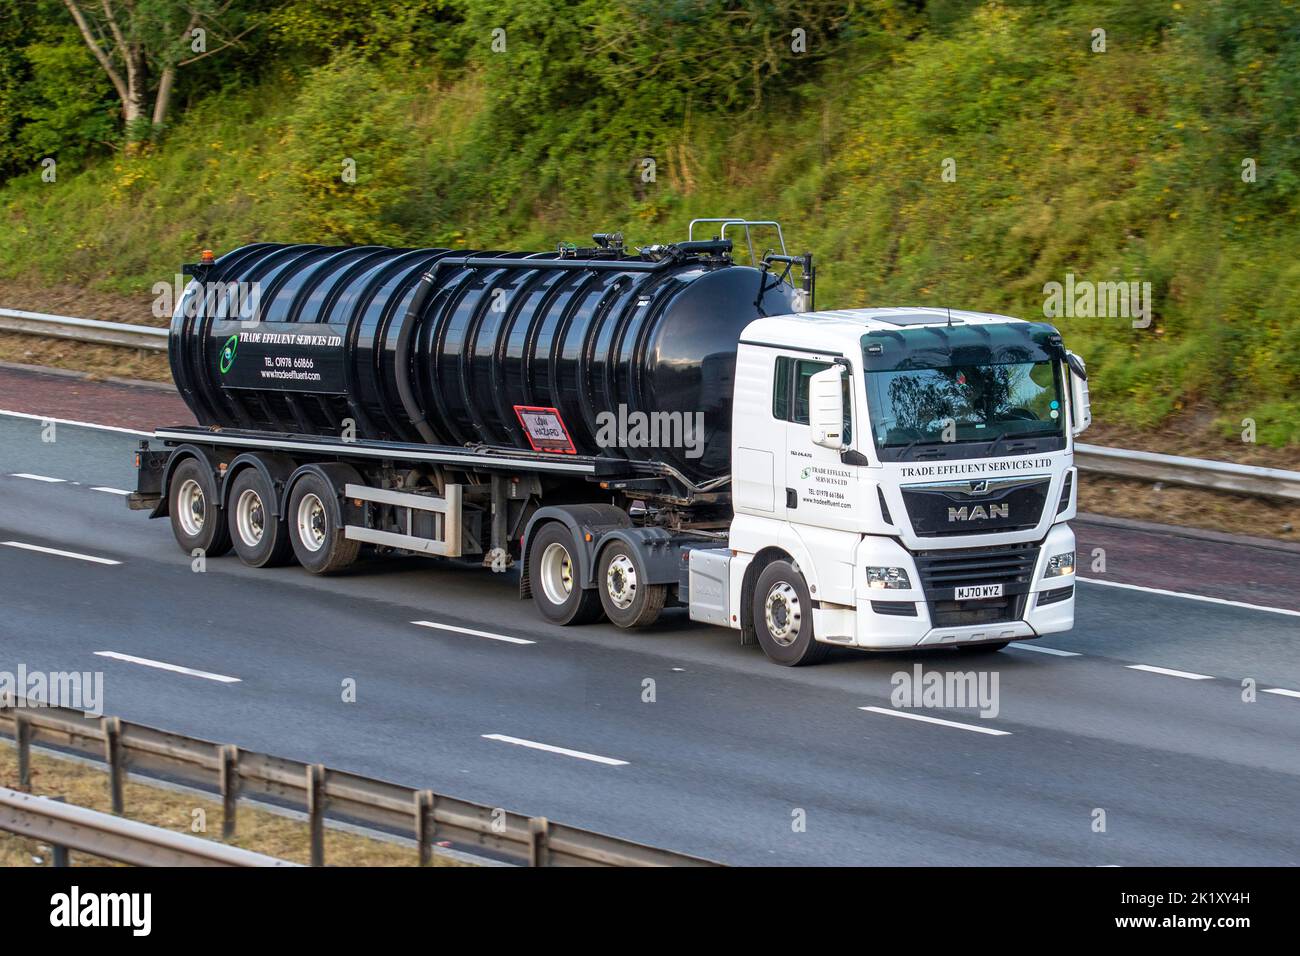 Trade Effluent Services Ltd, an independent waste management company.  Registered waste carriers tanker travelling on the M6 motorway, UK Stock Photo